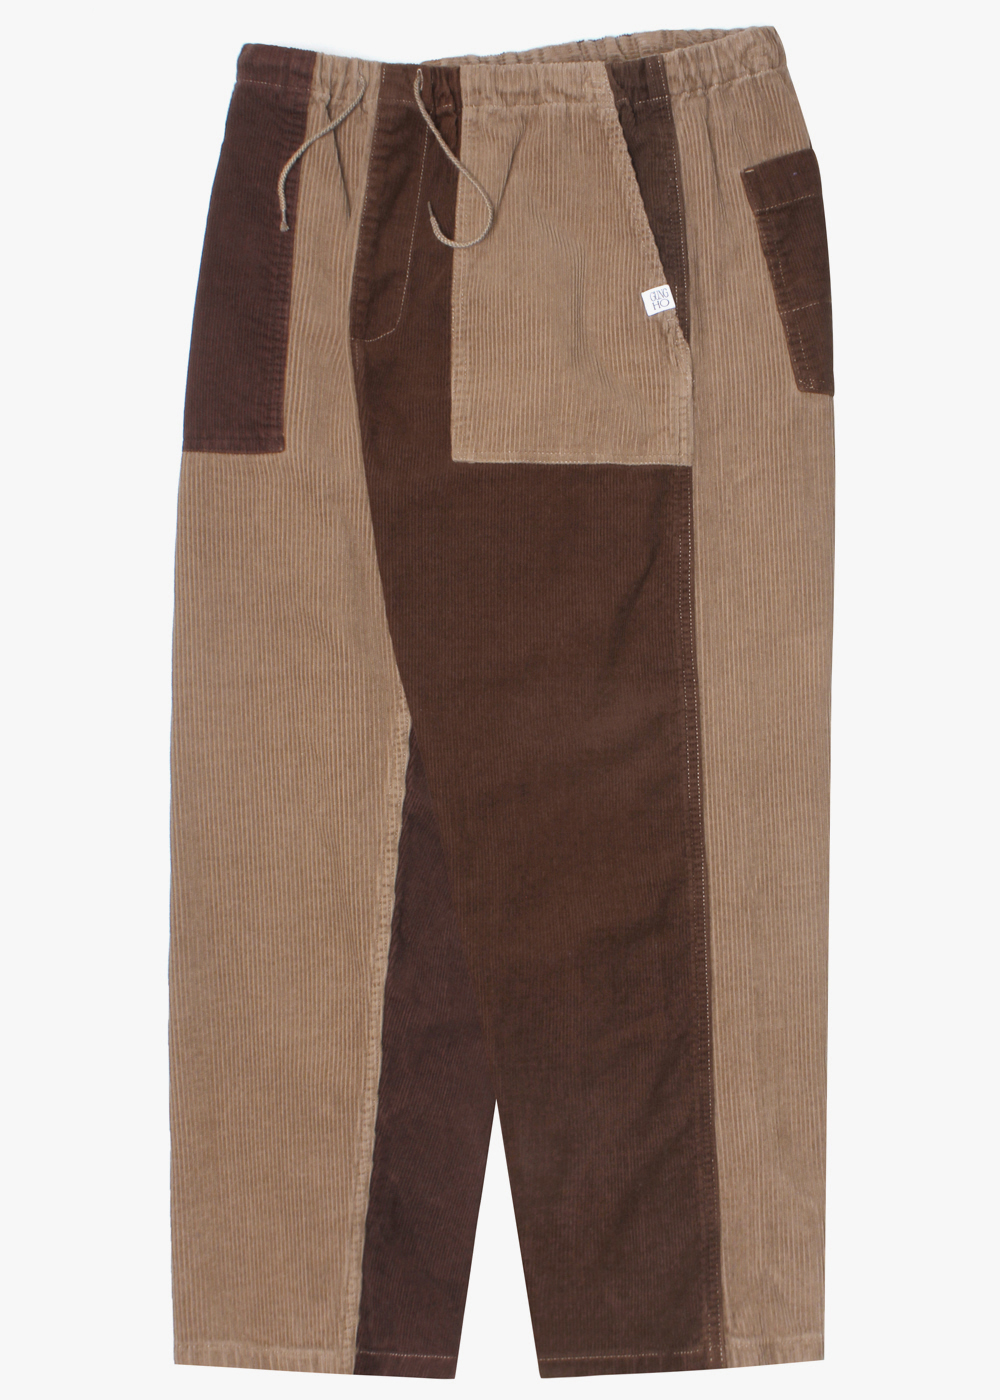 GUNG HO’loose straight fit’ patchwork corduroy pant